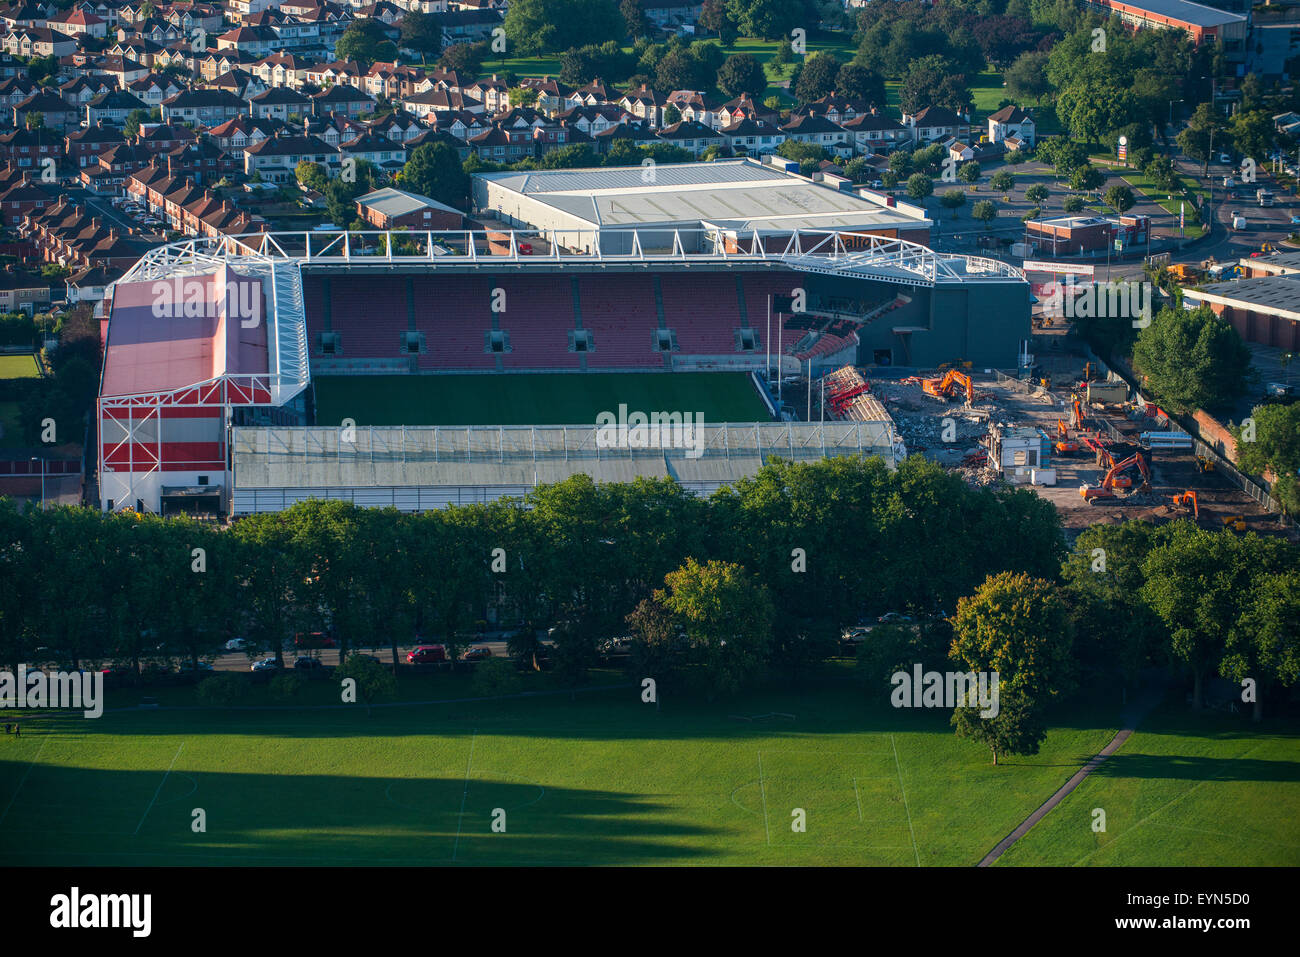 An Aerial view of Ashton Gate Stadium the home ground of Bristol City Football Club and Bristol Rugby Club. Stock Photo